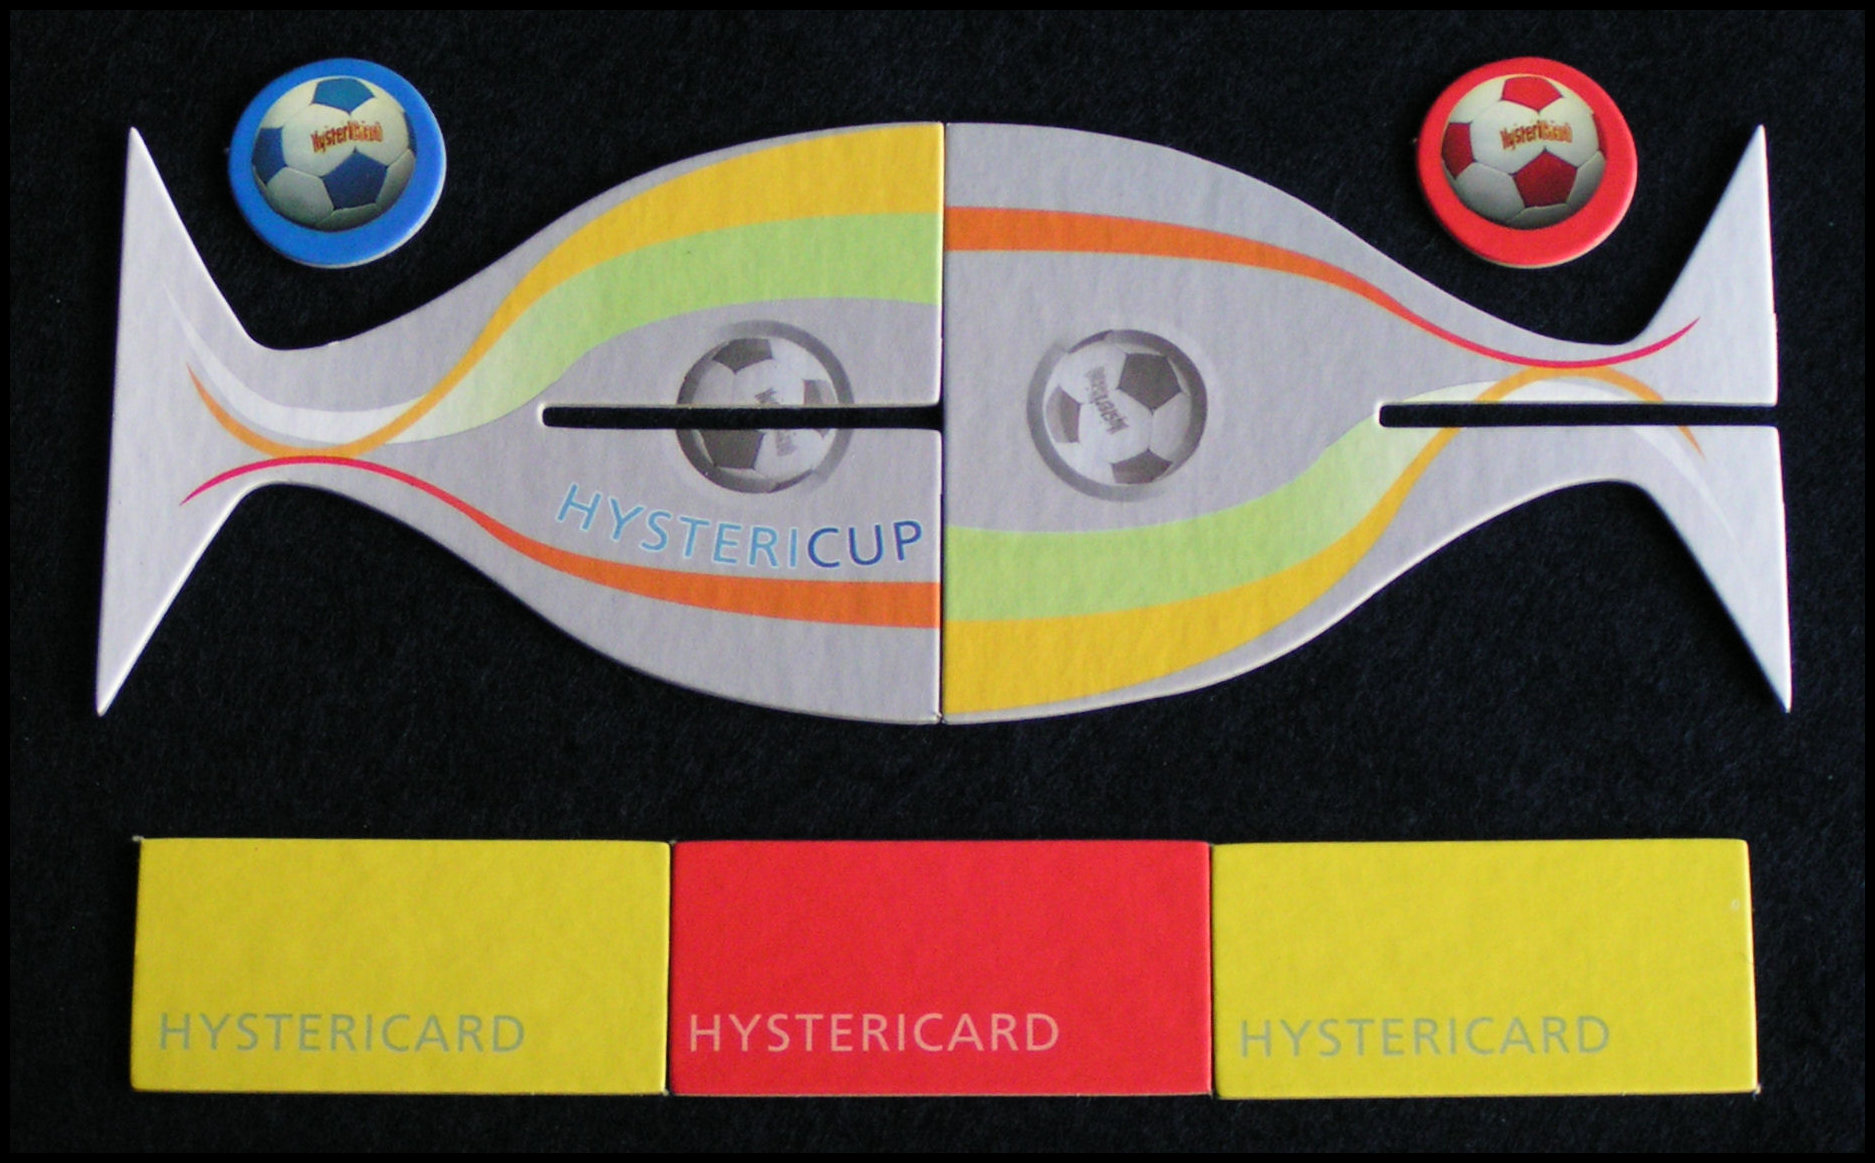 HysteriCoach - HysteriCards, Balls And Cup